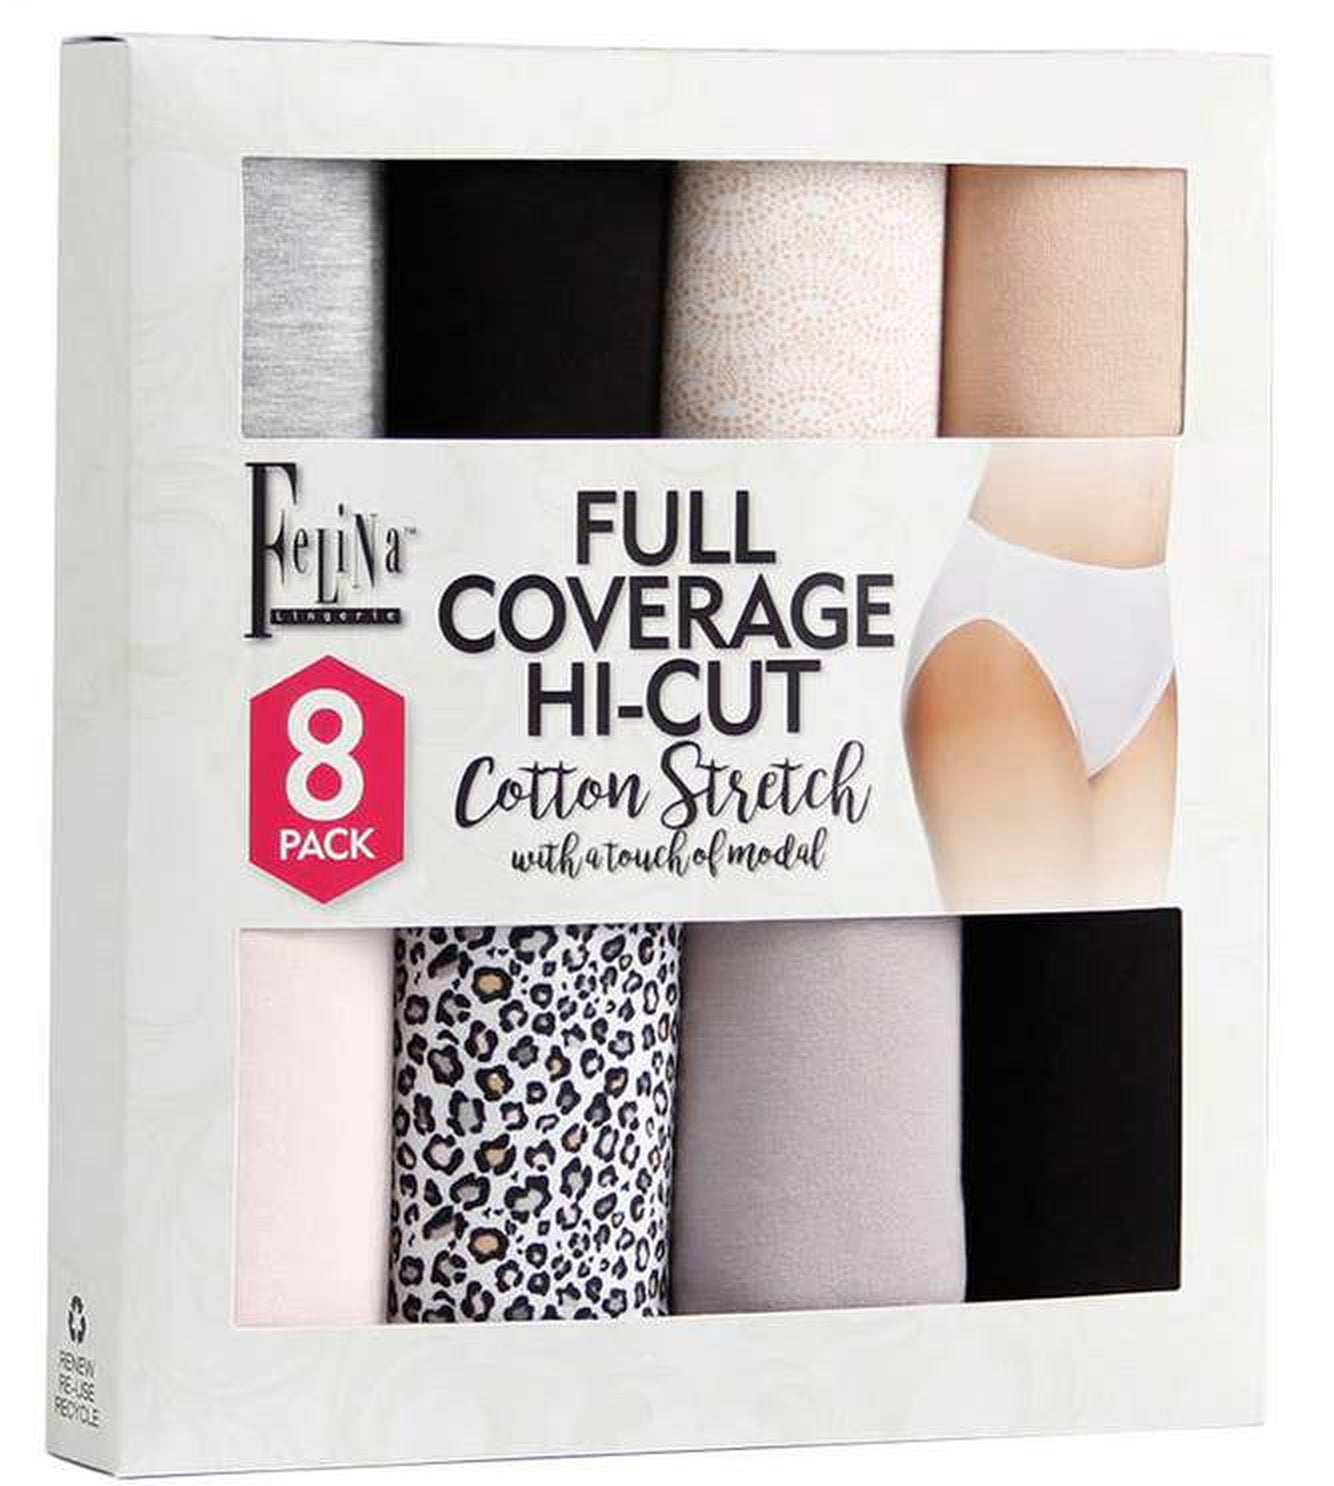 Felina Cotton Stretch Hi Cut Panty (6-Pack) Full Coverage Underwear for  Women - Sexy Lingerie Panties for Women, Style: C1818 (Animal Neutrals,  Small) 